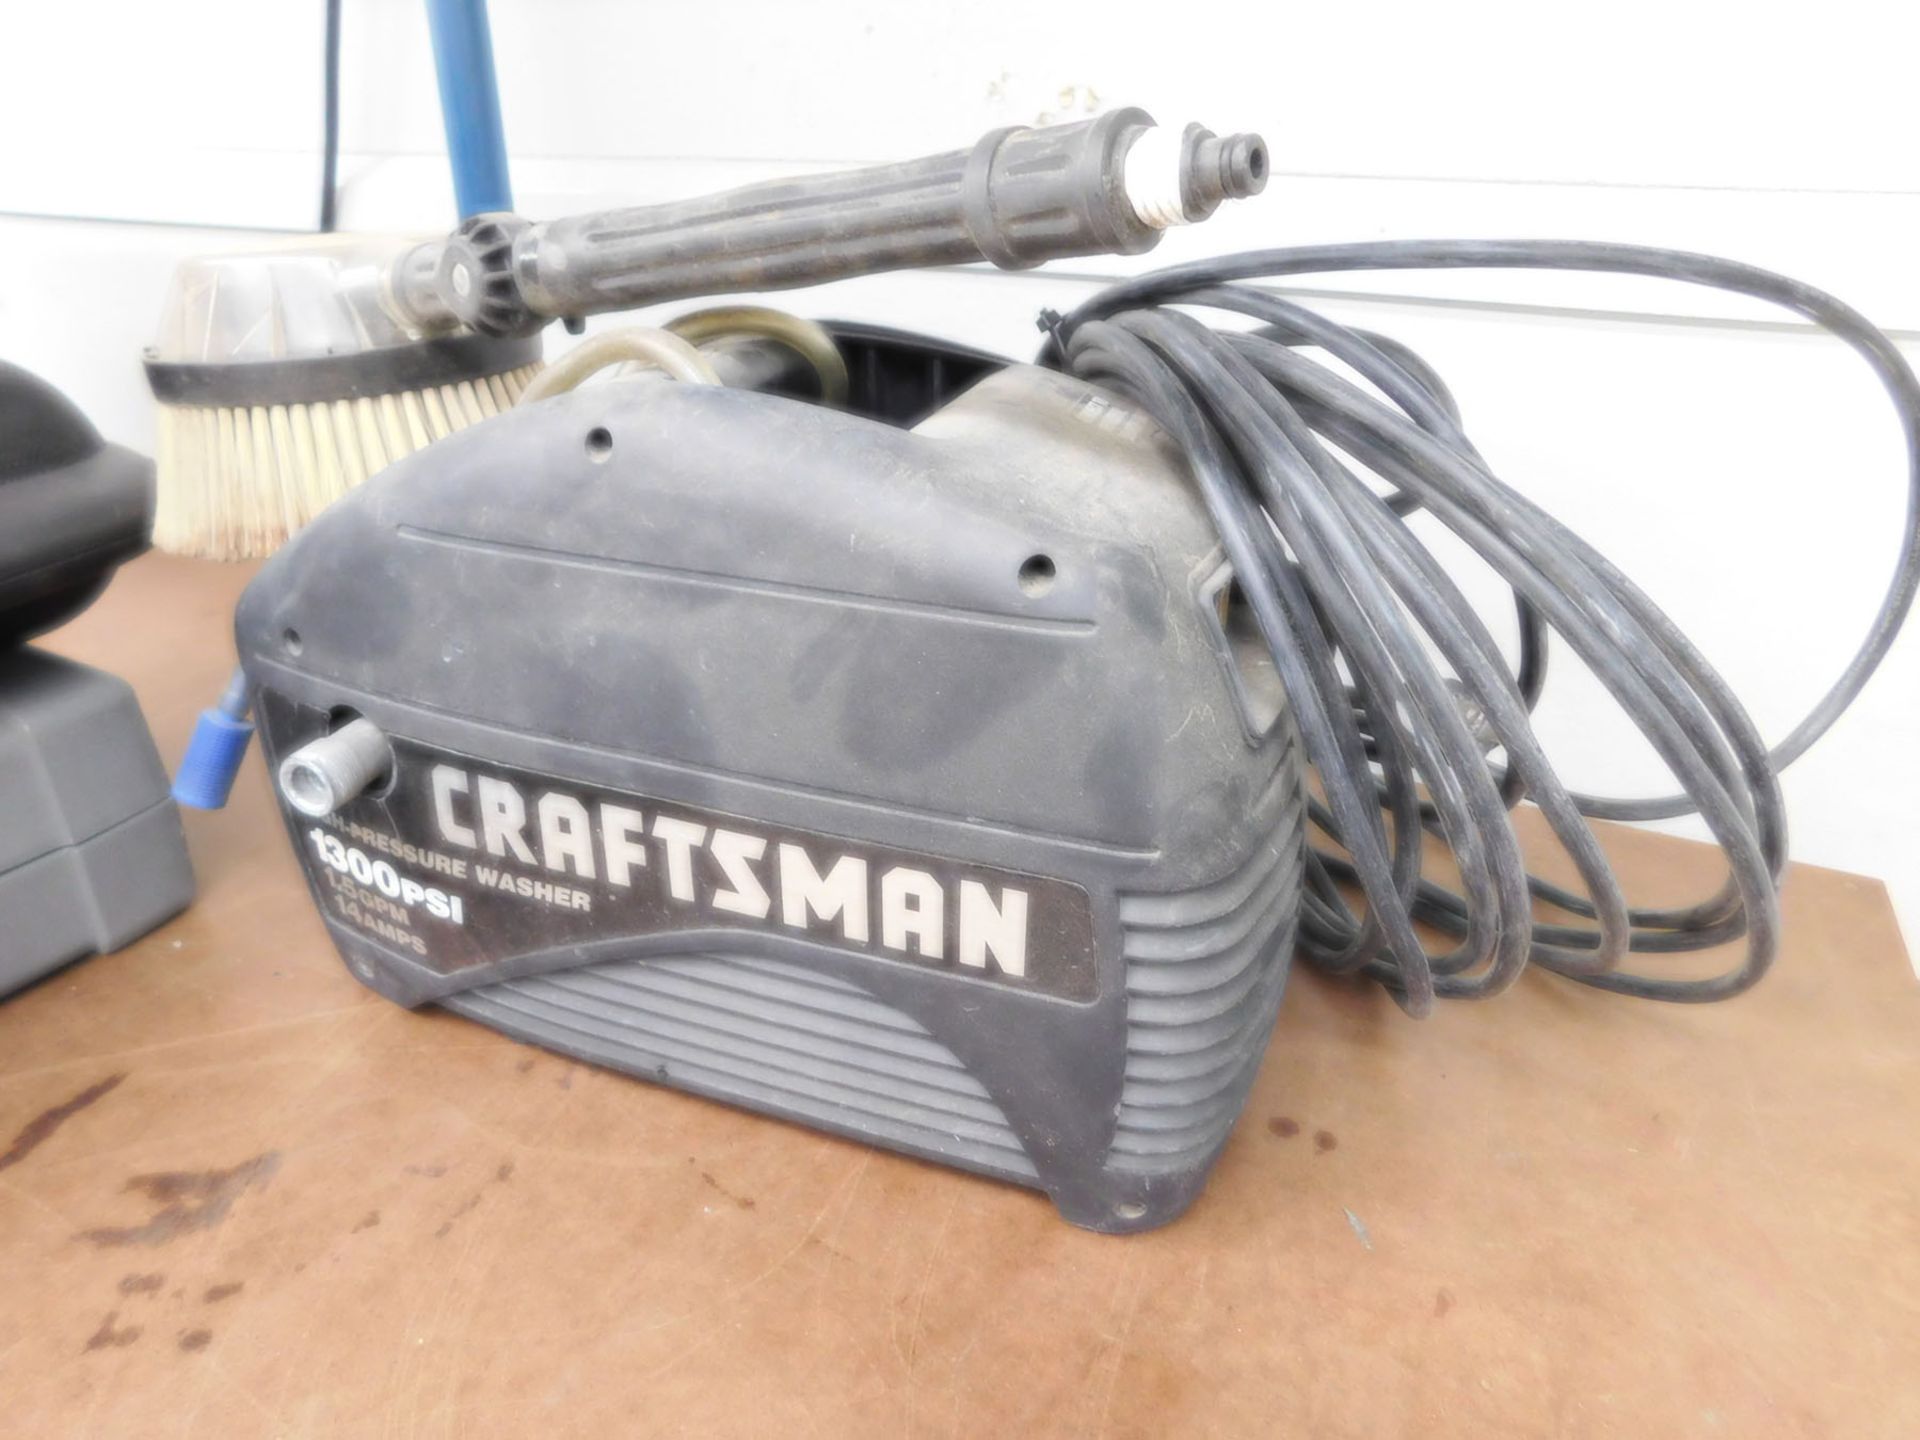 CRAFTSMAN HIGH PRESSURE WASHER; 1300-PSI, 1.5 GPM, 14-AMP - Image 2 of 2